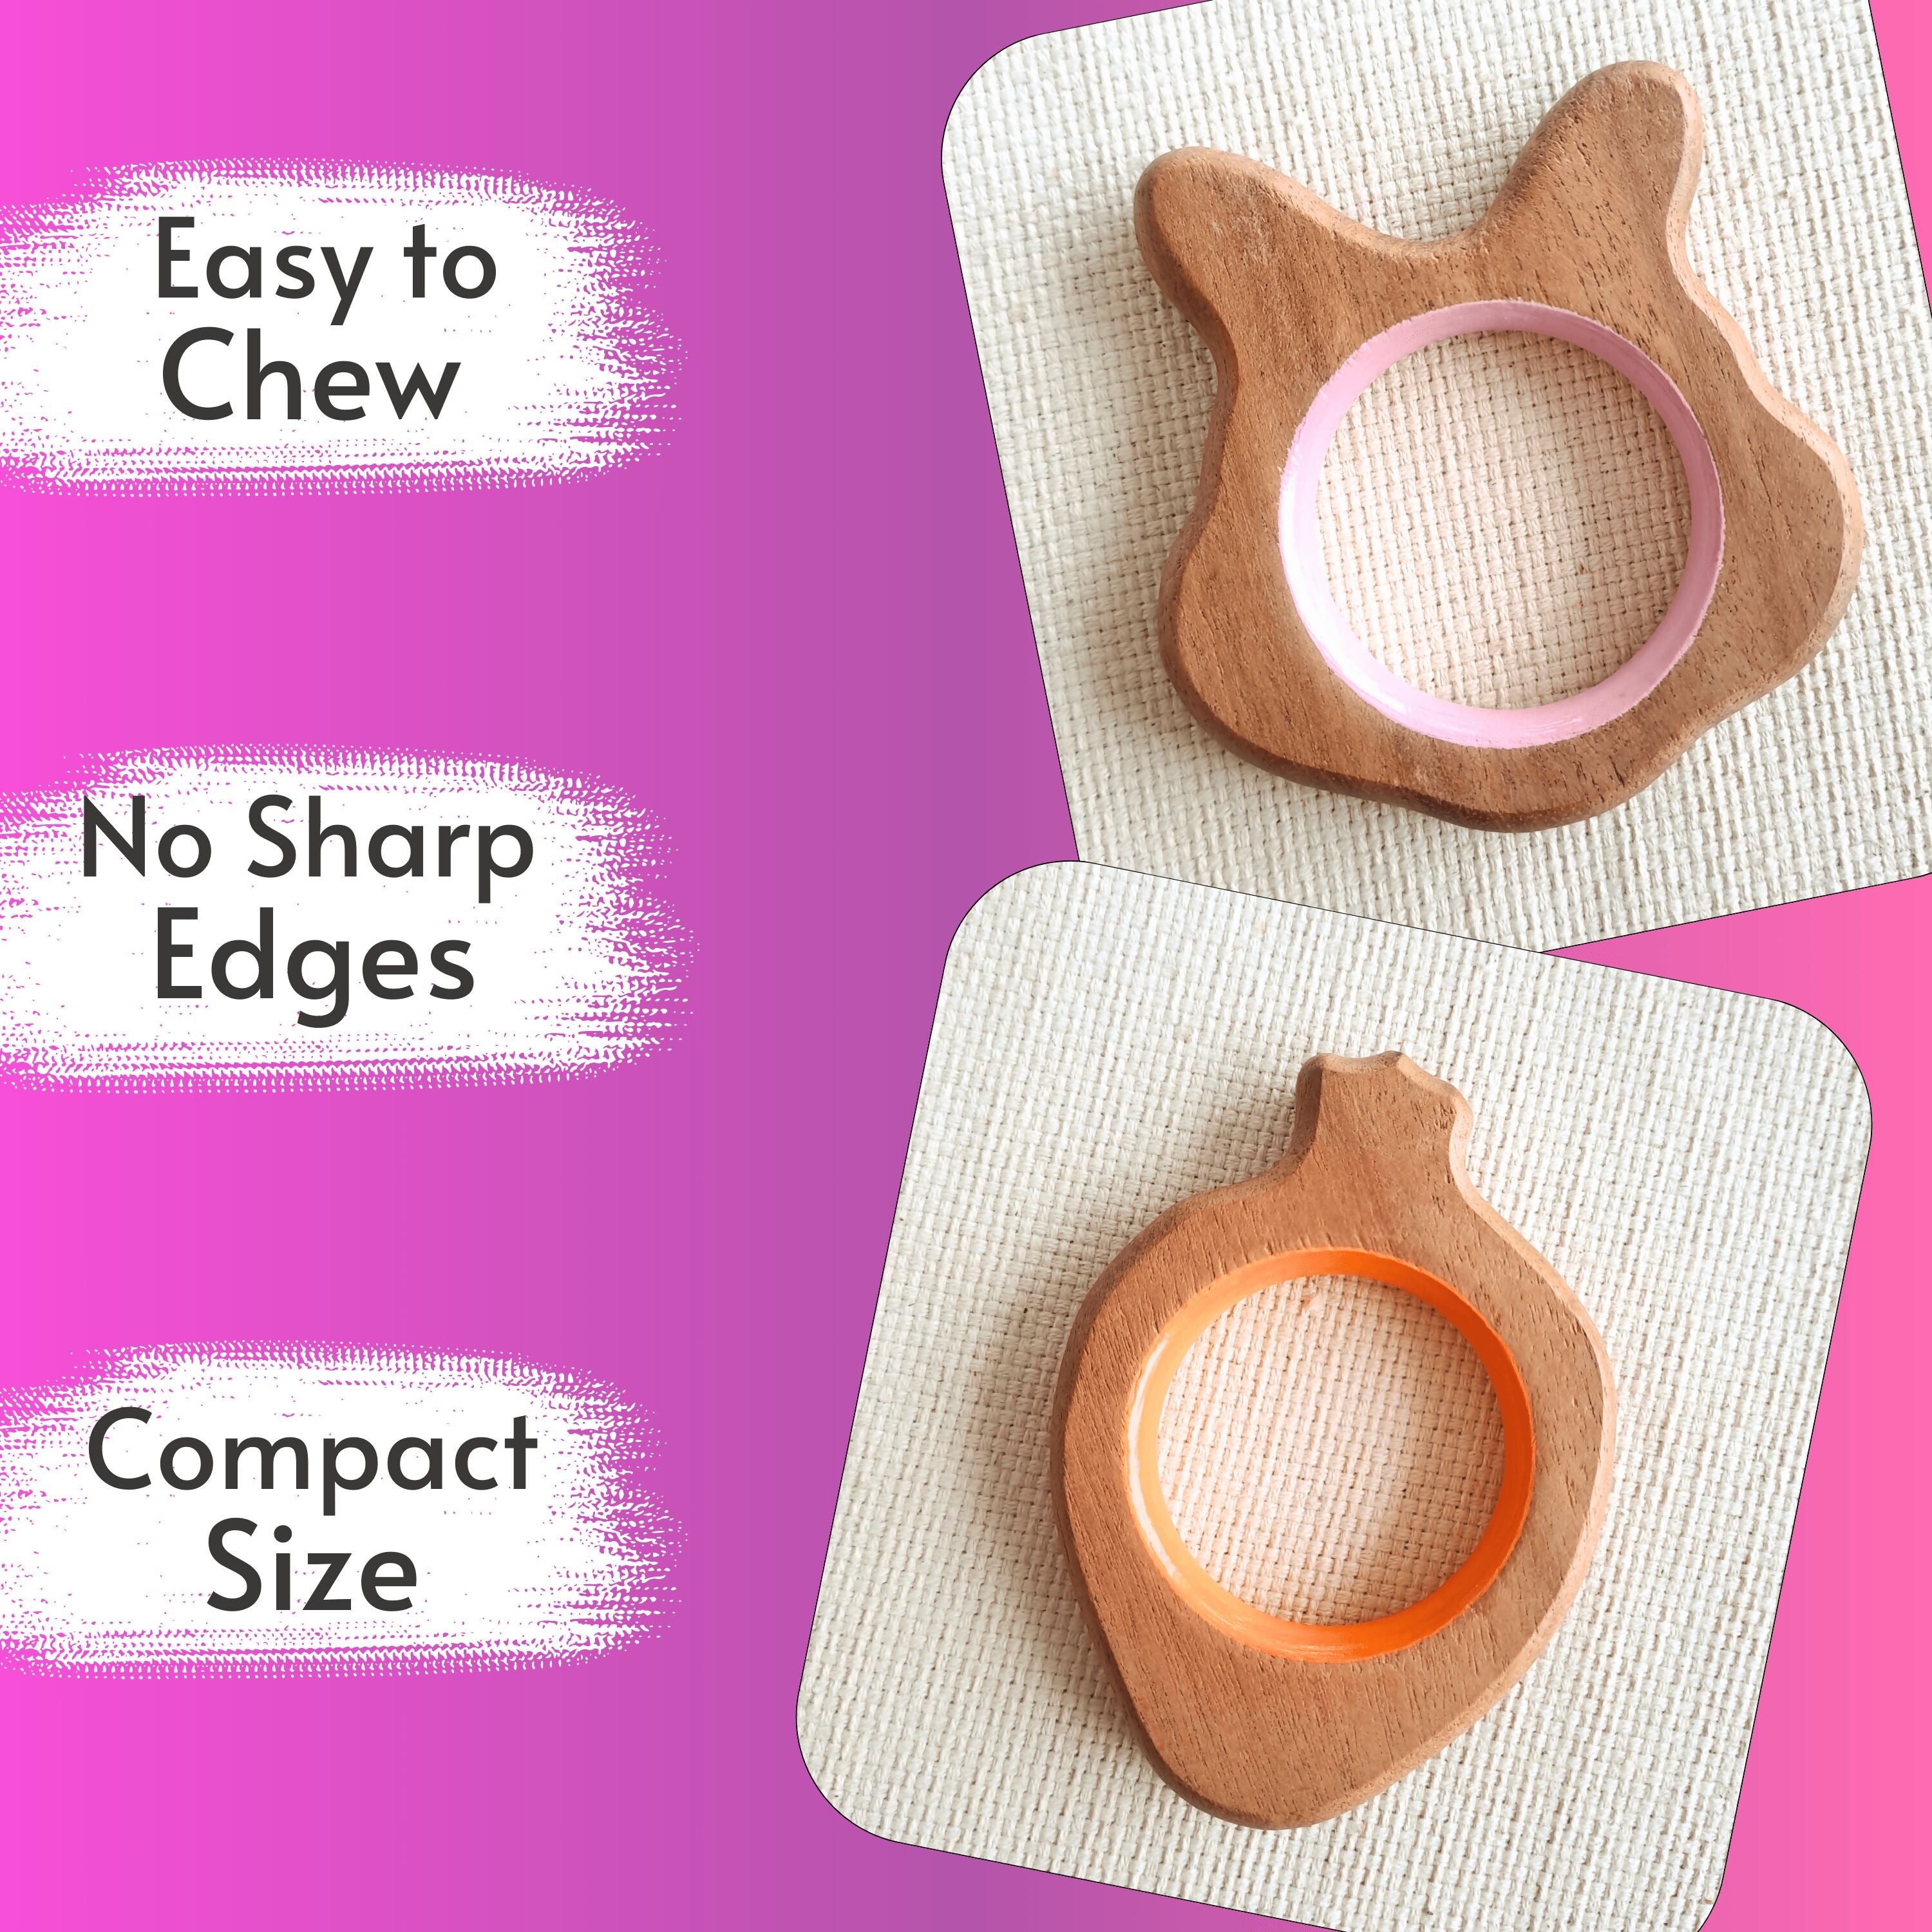 BABYCOV Cute Rabbit and Carrot Natural Neem Wood Teethers for Babies | Natural and Safe | Goodness of Organic Neem Wood | Both Chewing and Grasping Toy | Set of 2 (Age 4+ Months) - PyaraBaby